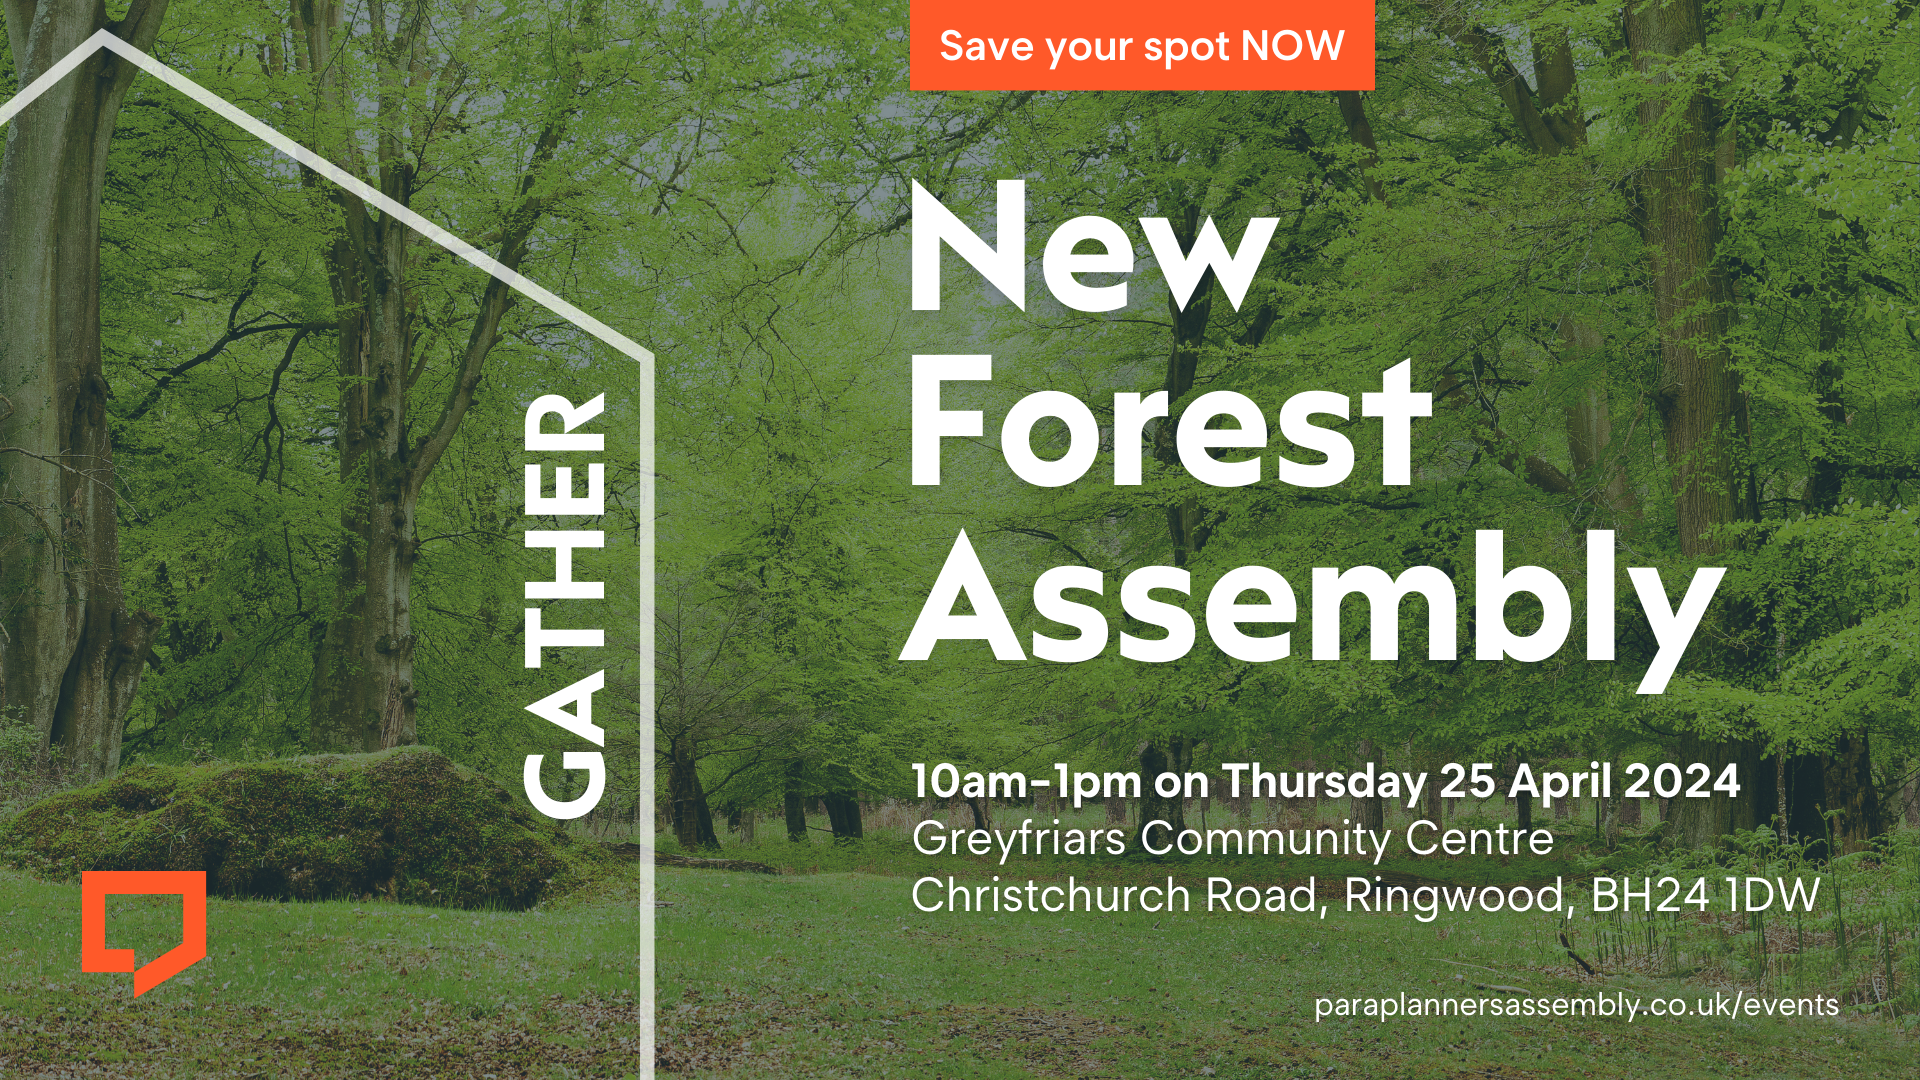 Save your spot now. New Forest Assembly. 10am-1pm on Thursday 25 April 2024. Grey friars Community Centre, Christchurch Road, Ringwood, BH24 1DW. Visit paraplannersassemble.co.uk/events